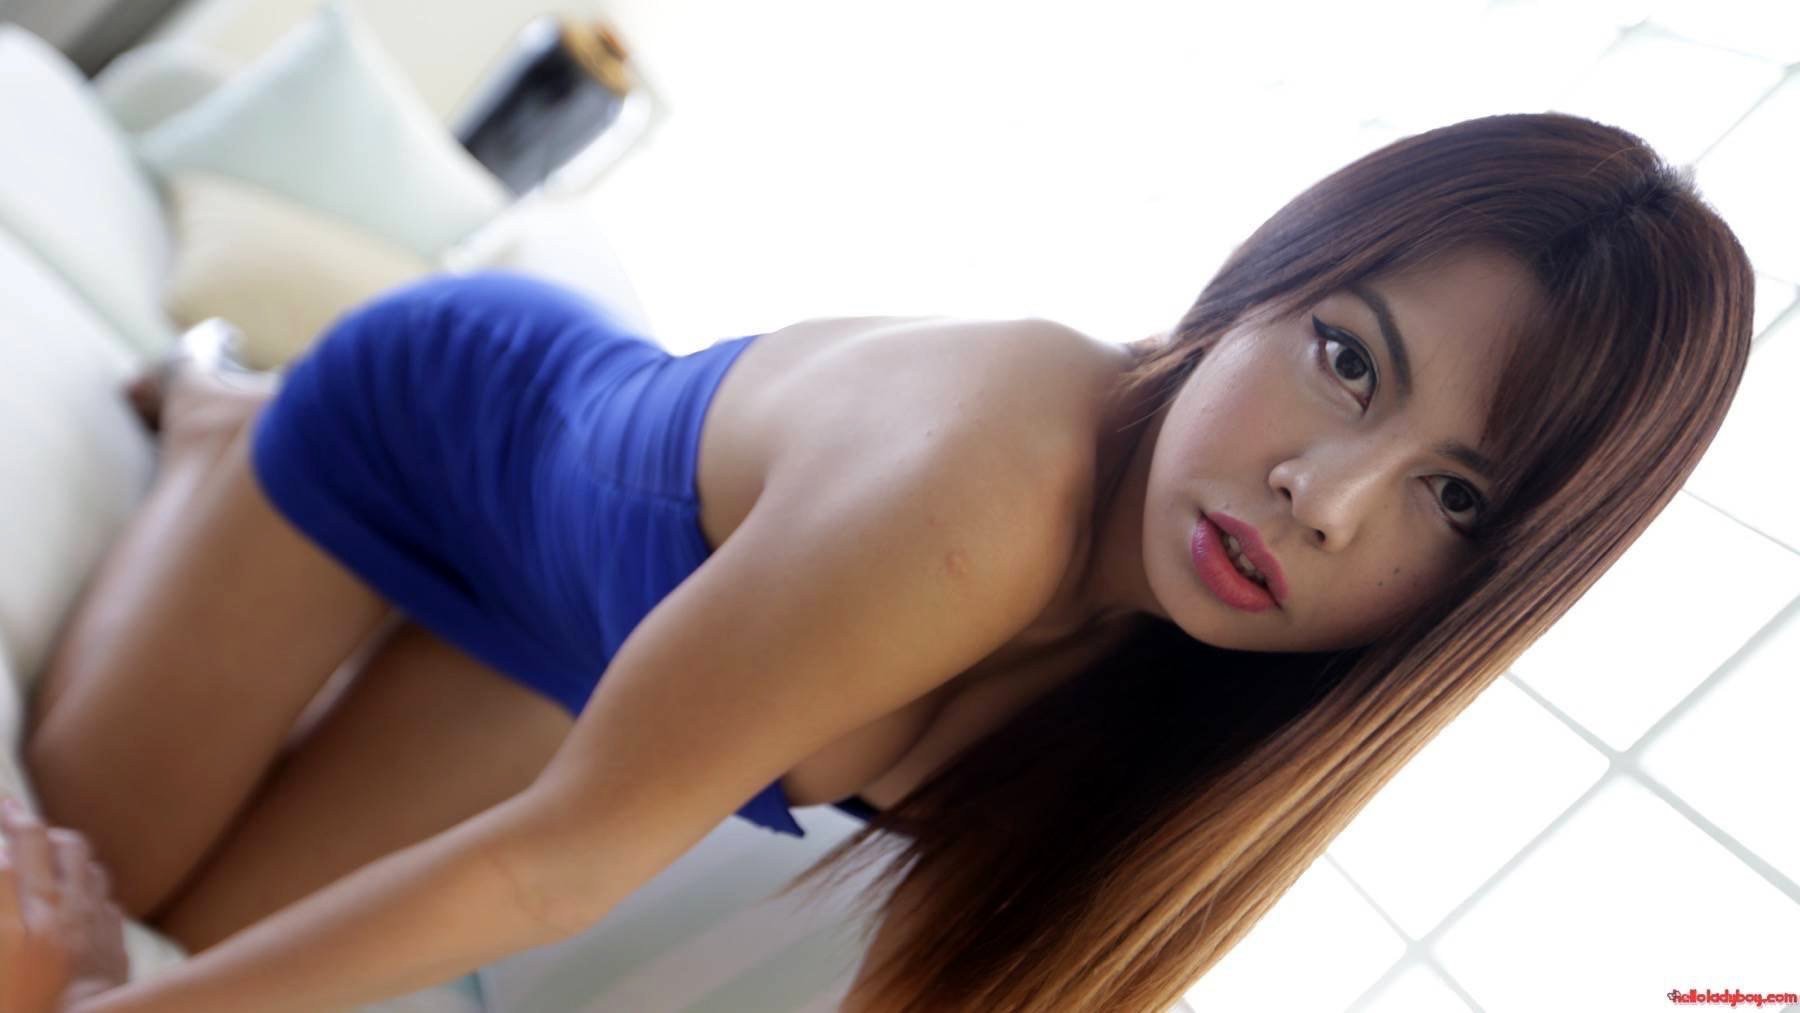 20 Year Old Busty Asian T-Girl Strips To Her Massive Breasts And Tool